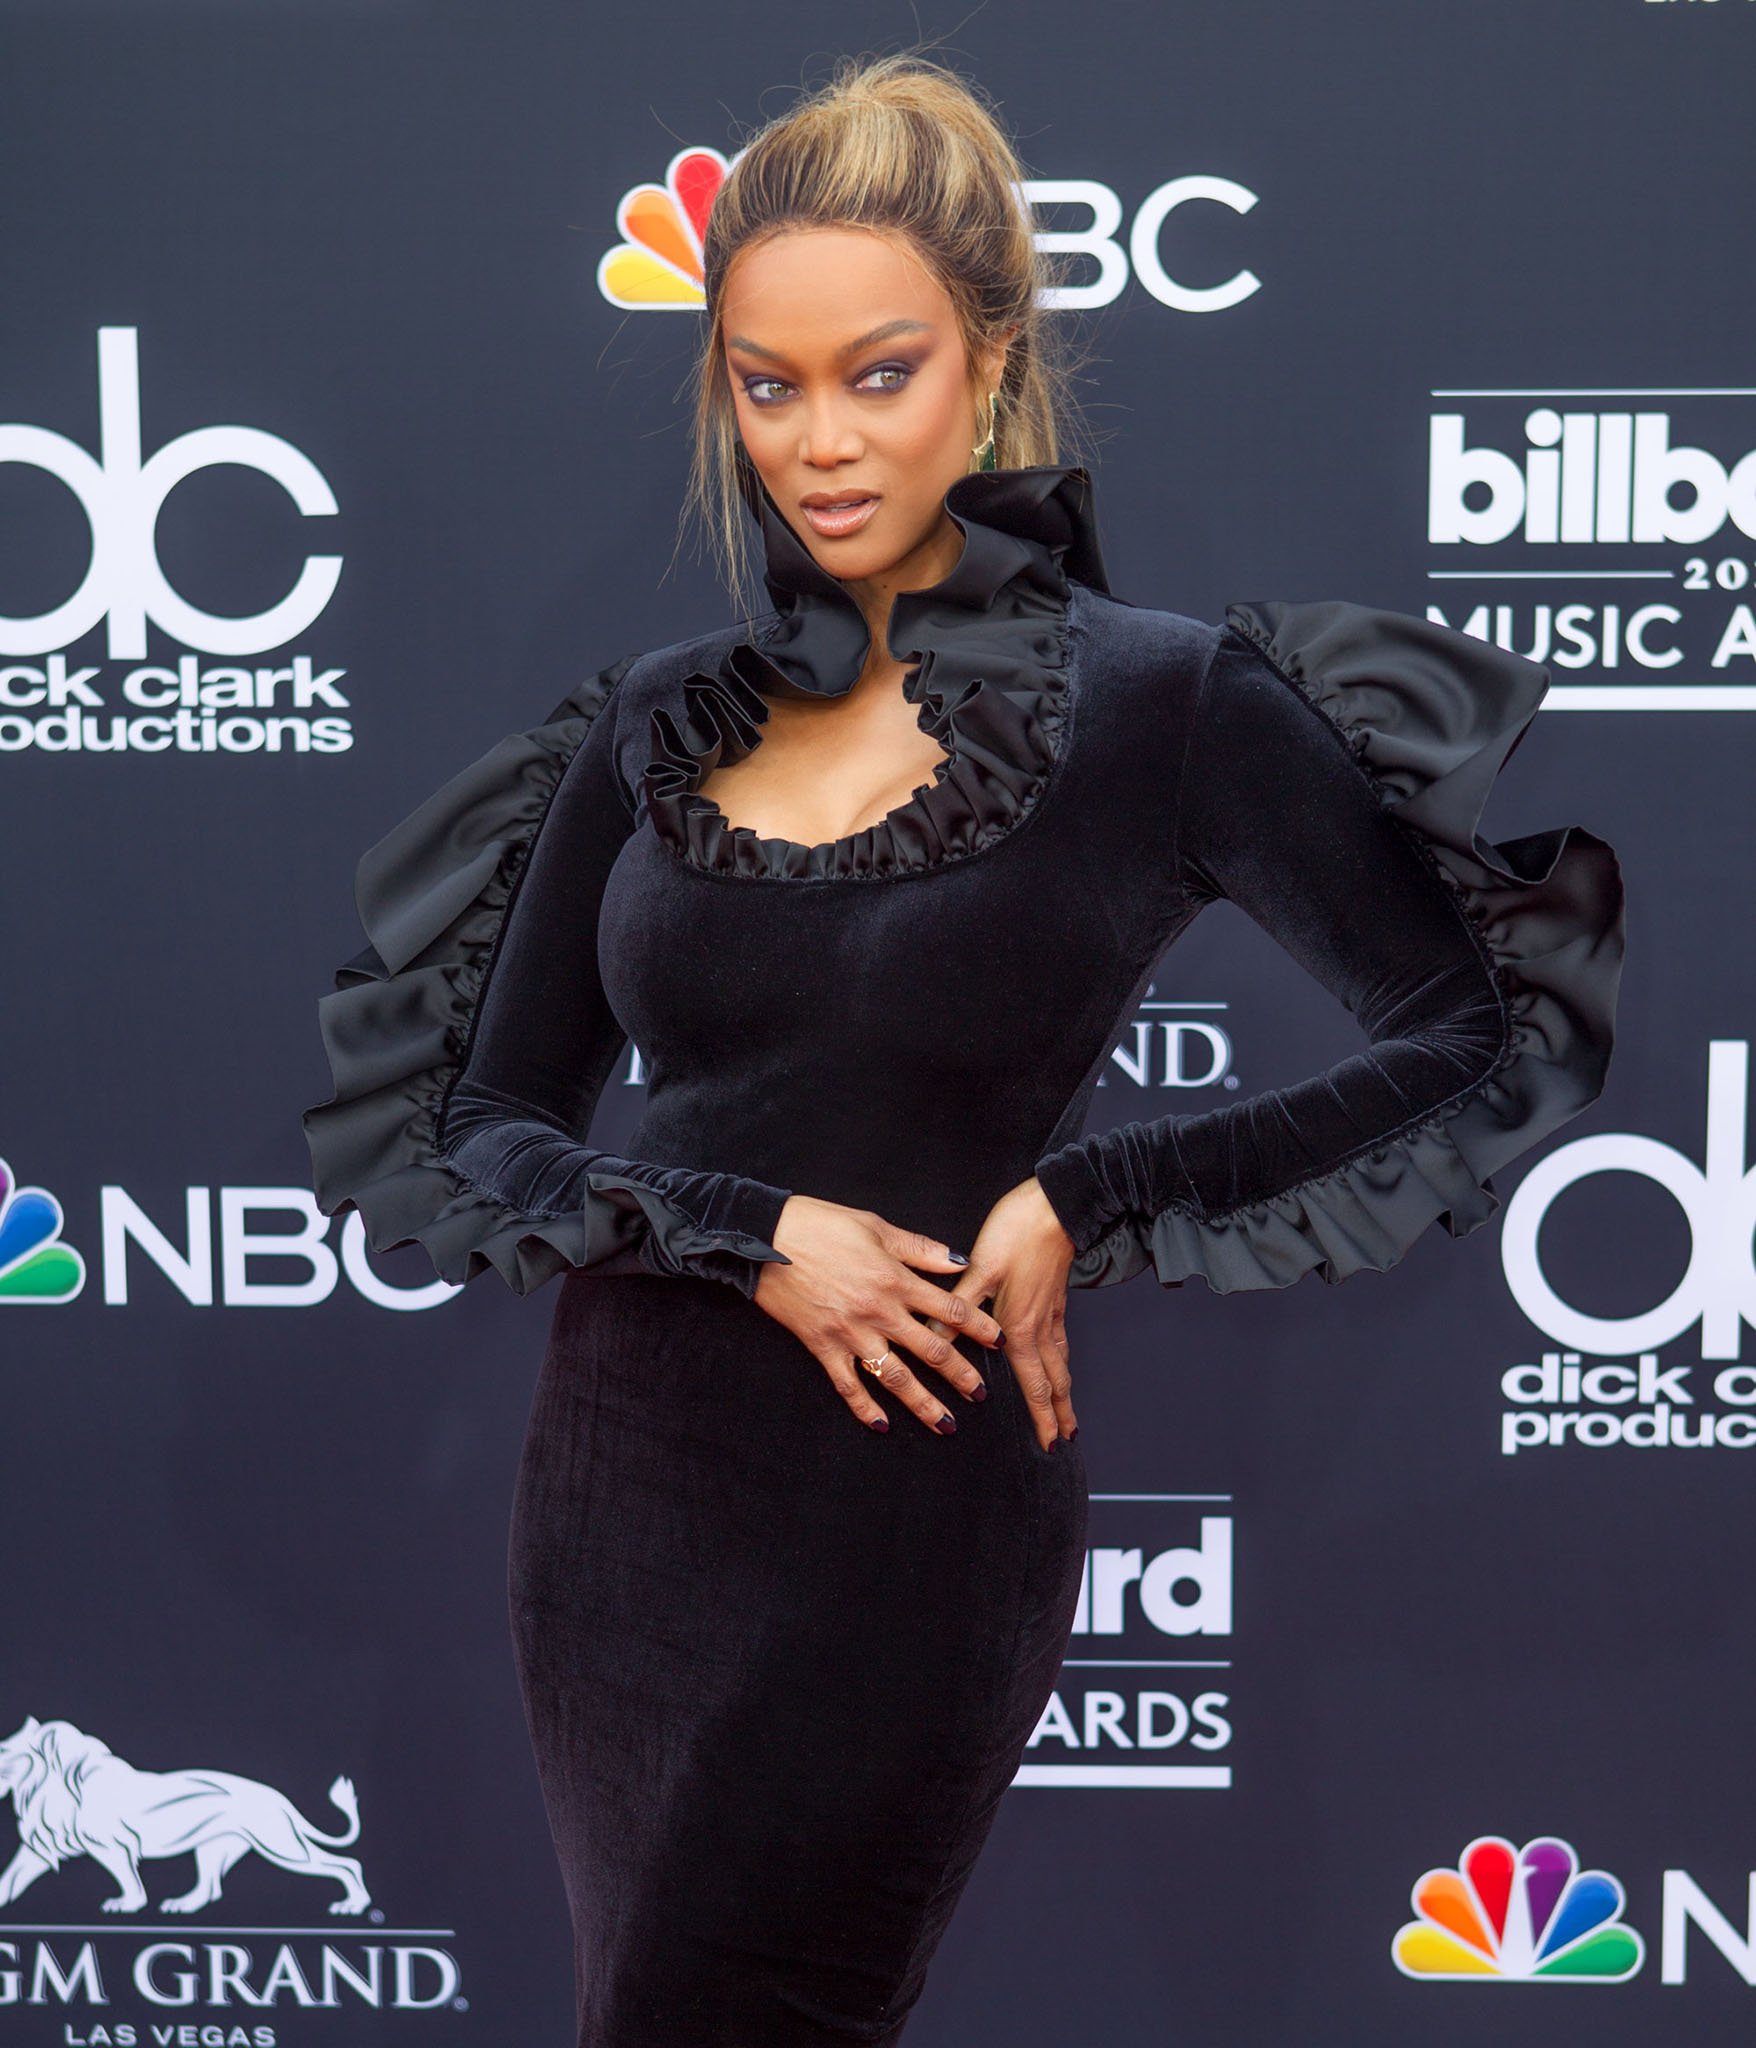 Tyra Banks has amassed a hefty net worth from appearing on major runways, magazine covers, and television shows, including America's Next Top Model, and from her own production company, Bankable Productions